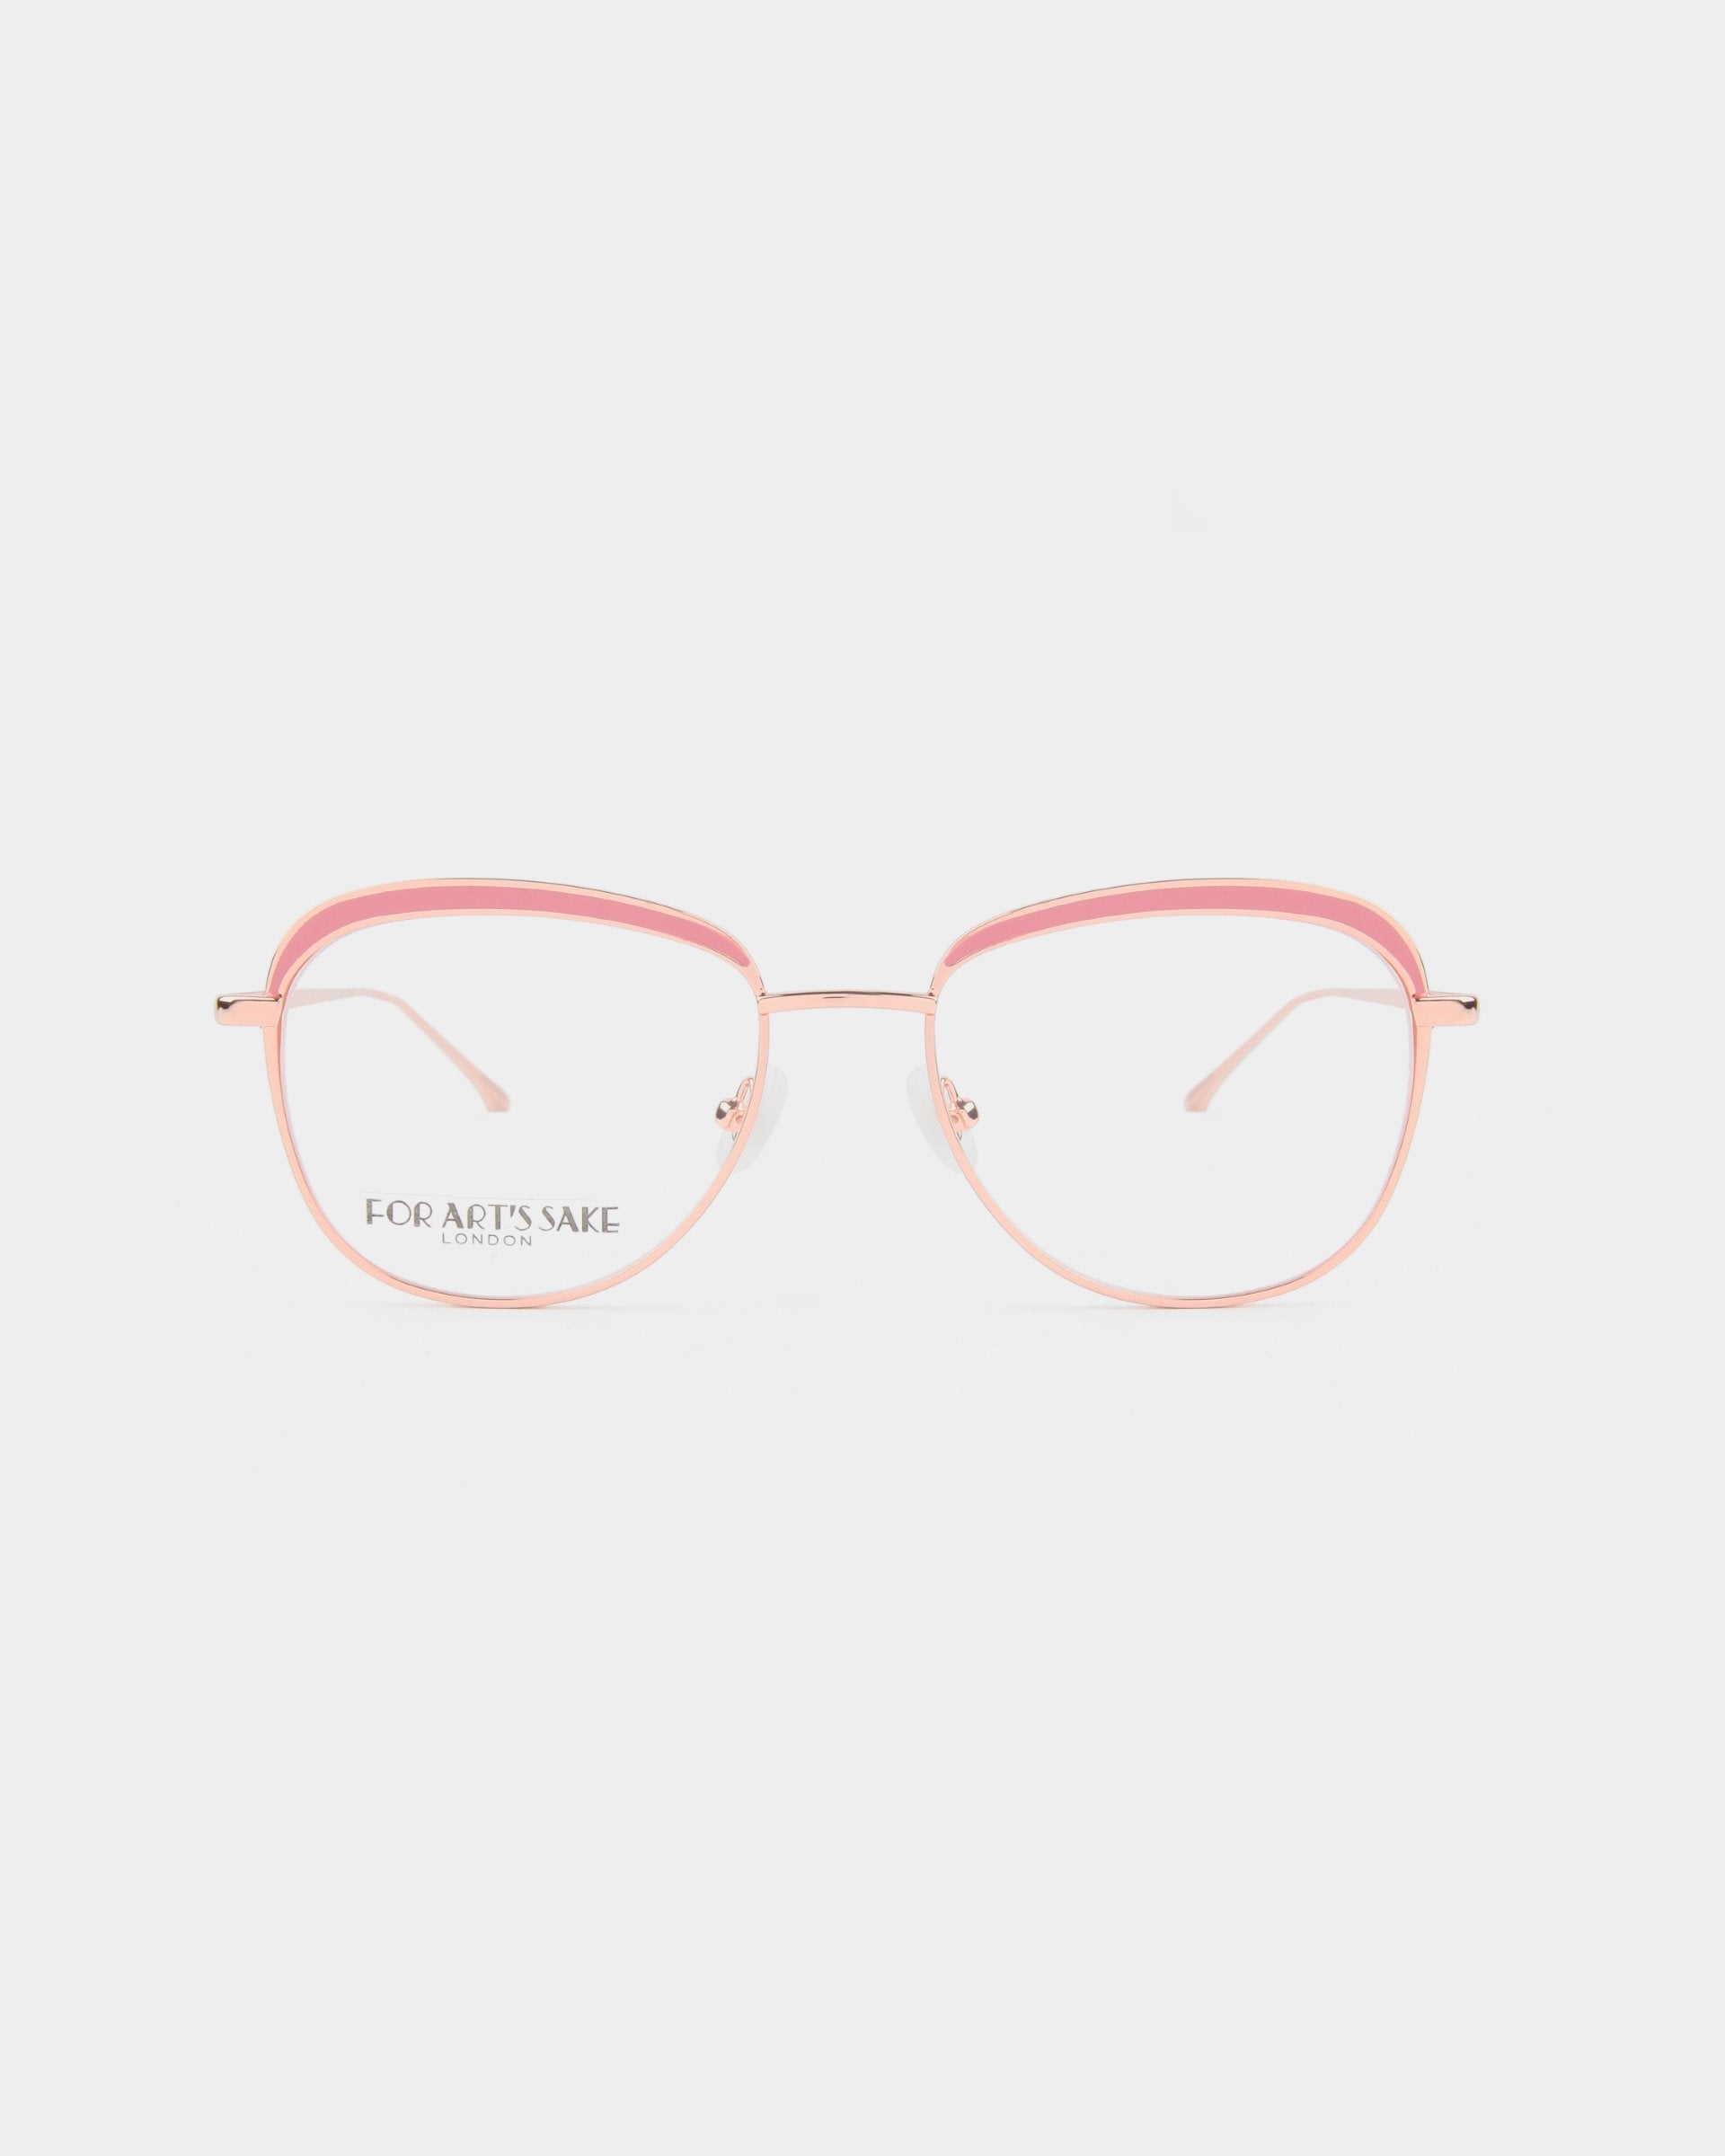 A pair of stylish Smoothie eyeglasses with rose gold wire frames and pink acetate accents along the top, featuring 18-karat gold plating for an added touch of luxury. The lenses are clear, with "LONDON" and "FOR ART'S SAKE®" visible on the left lens. The background is plain white.